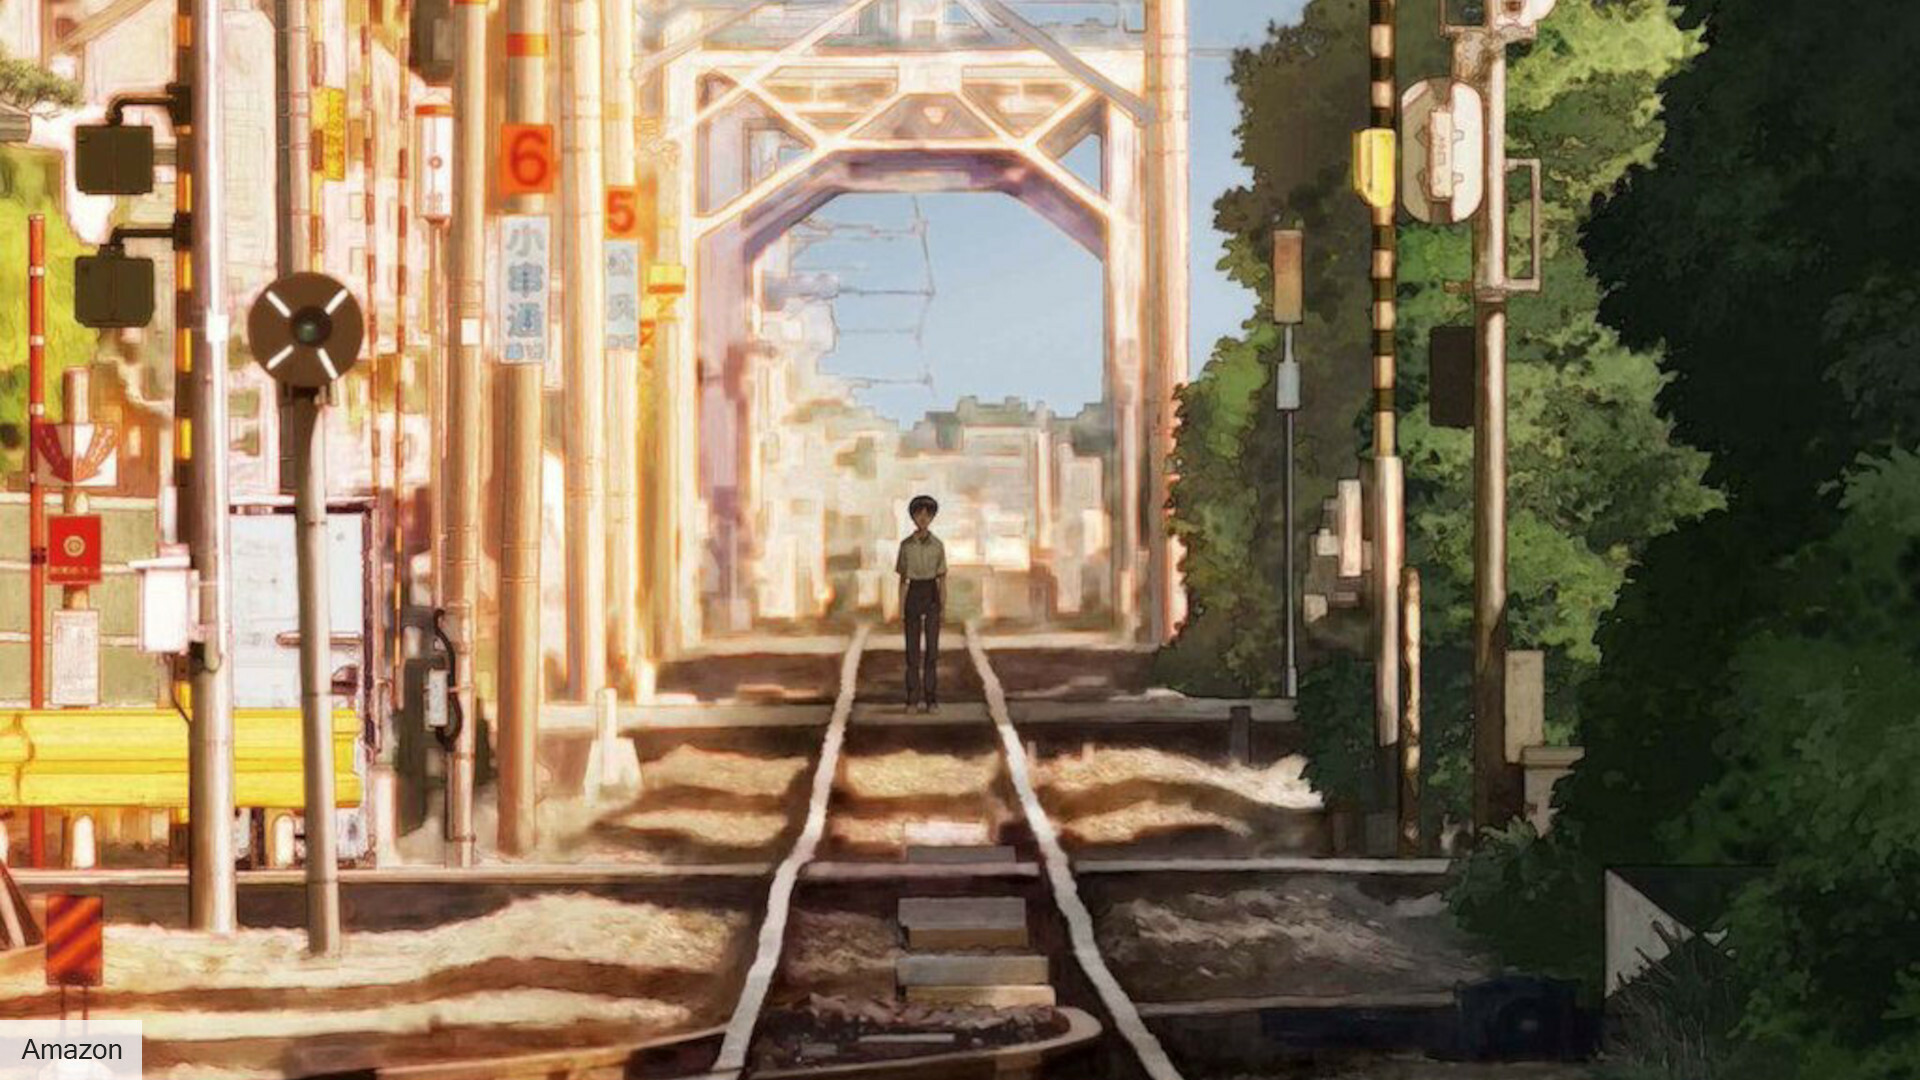 Evangelion: 3.0+1.0 Thrice Upon a Time: The film's theme song, “One Last Kiss”, Performed by Hikaru Utada. 1920x1080 Full HD Background.